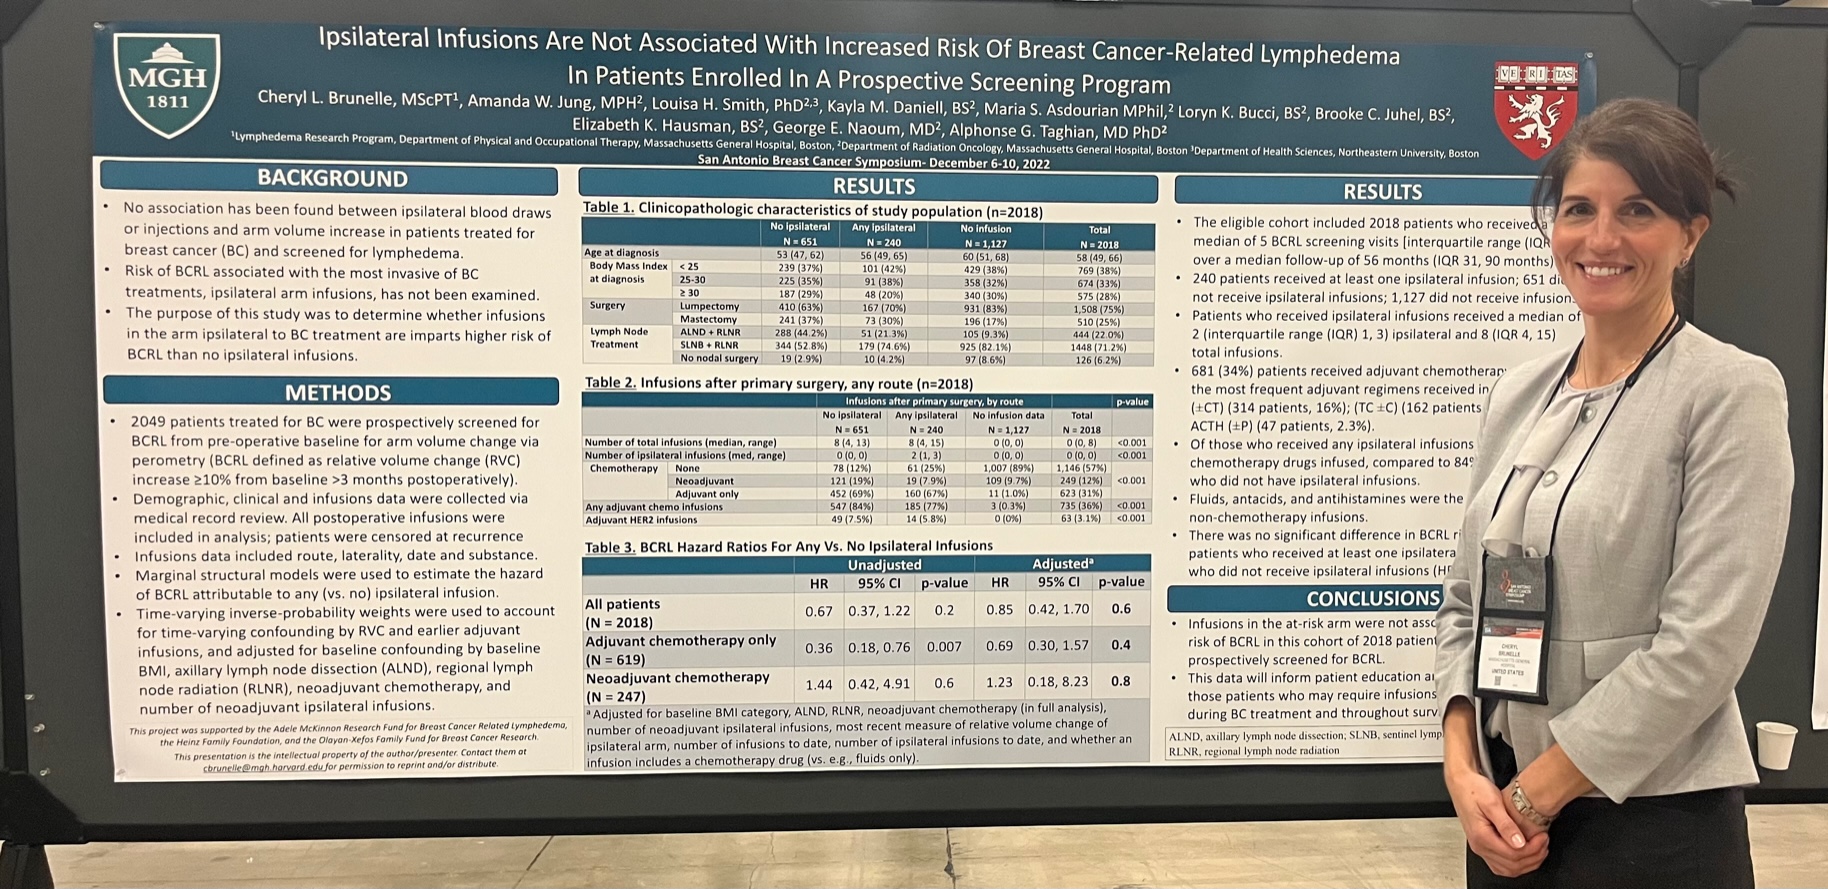 Ipsilateral Infusions Are Not Associated with Increased Risk of Breast Cancer-Related Lymphedema in Patients Enrolled in a Prospective Screening Program - Presented by Cheryl Brunelle